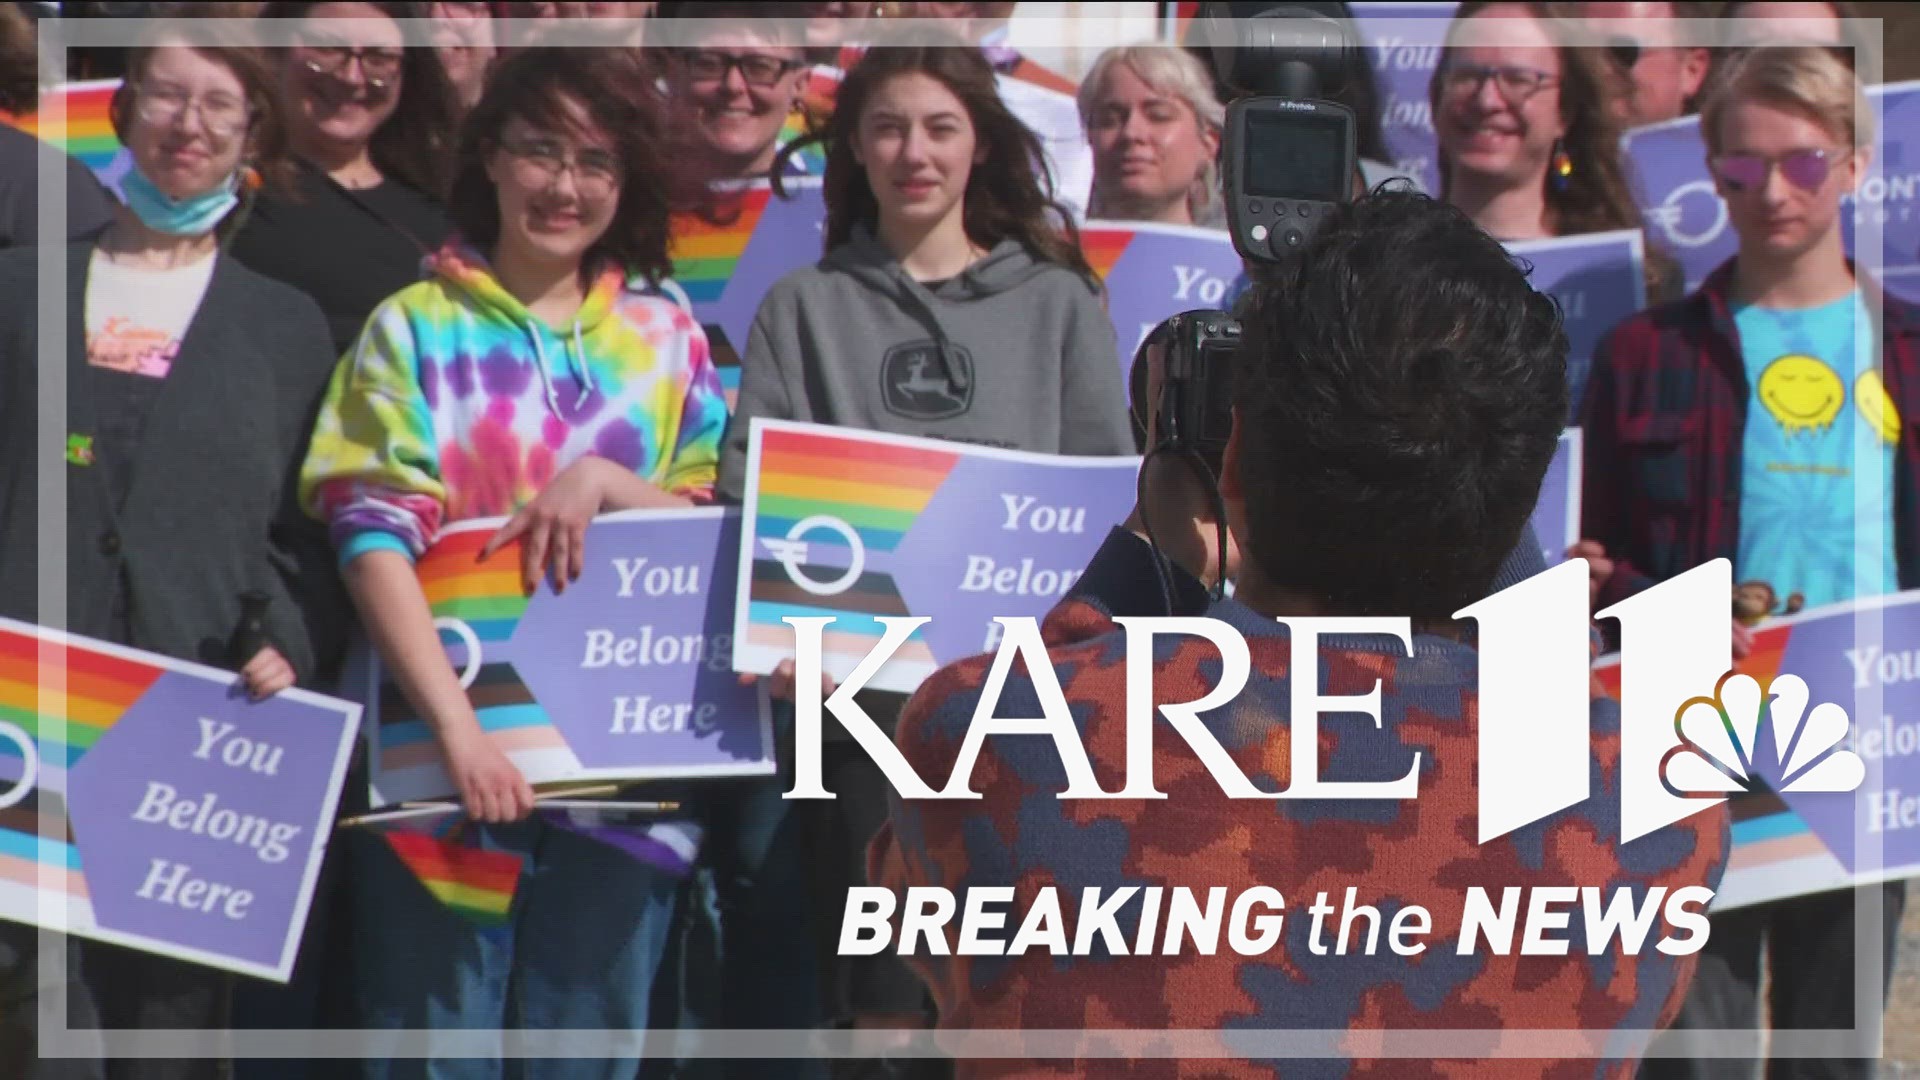 Despite living in a trans refuge state, four students told KARE 11 it took switching schools before truly feeling safe and seen.